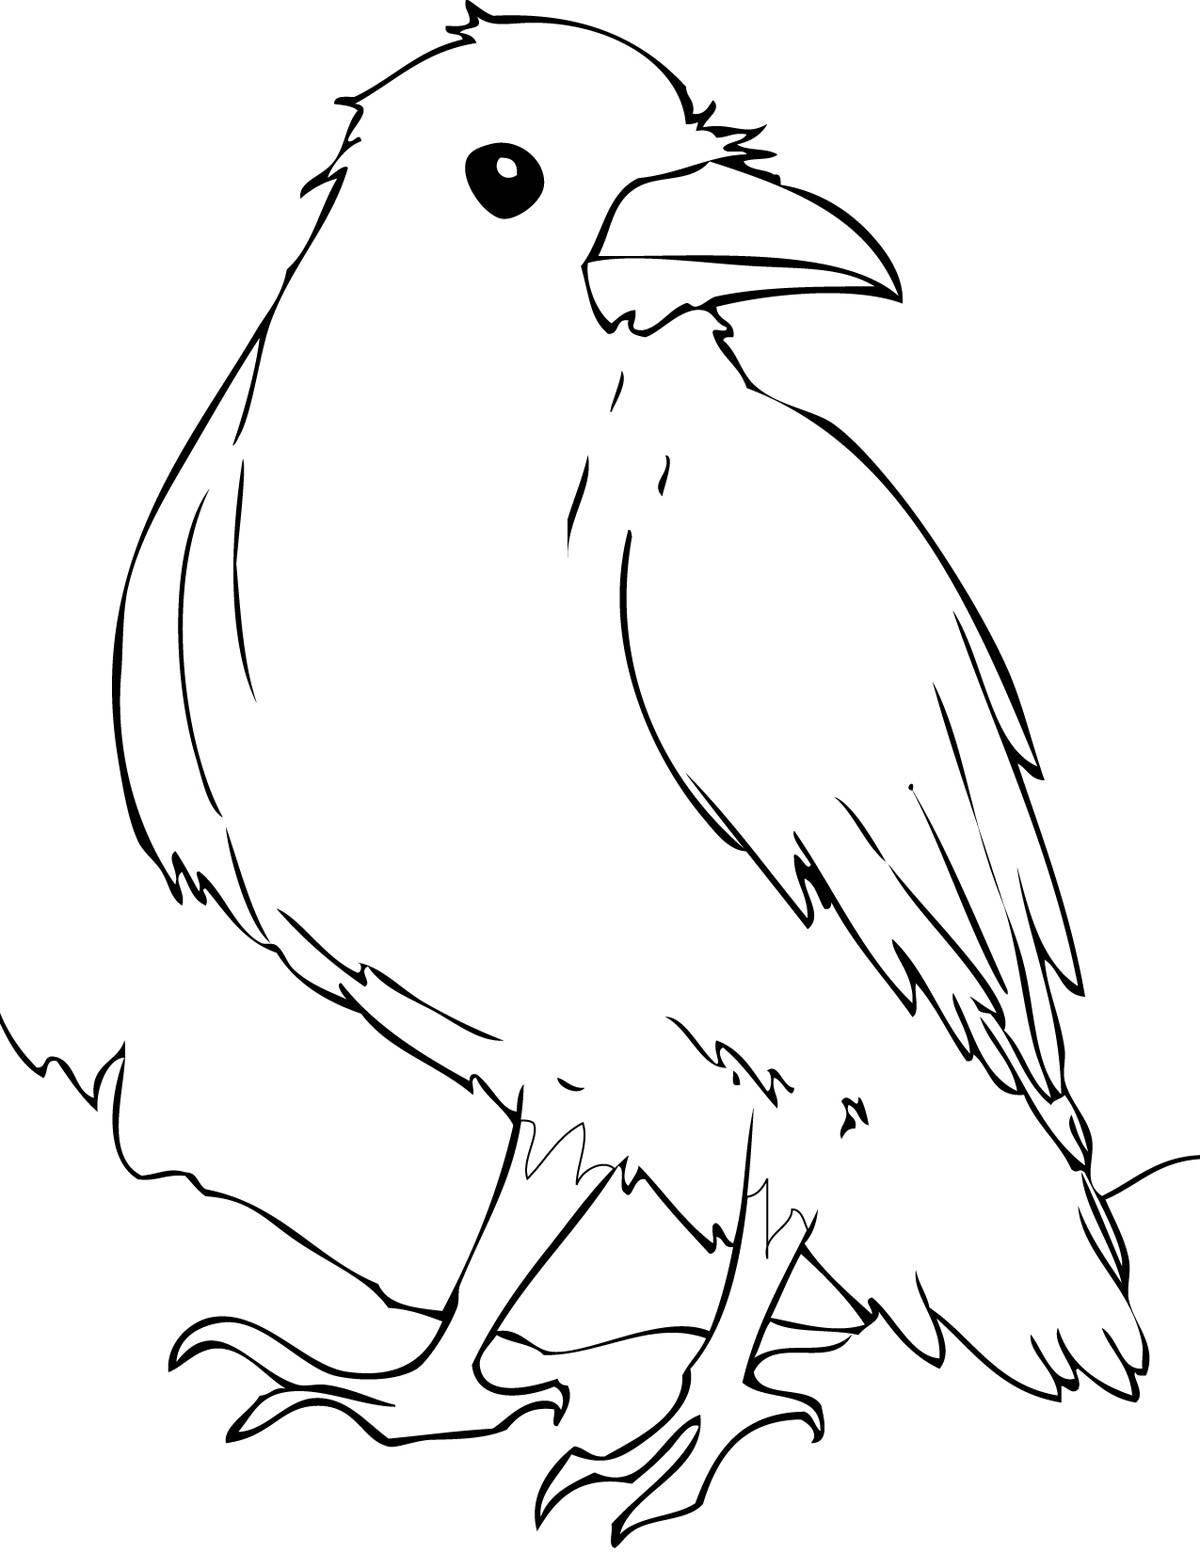 Exciting crow coloring book for 3-4 year olds